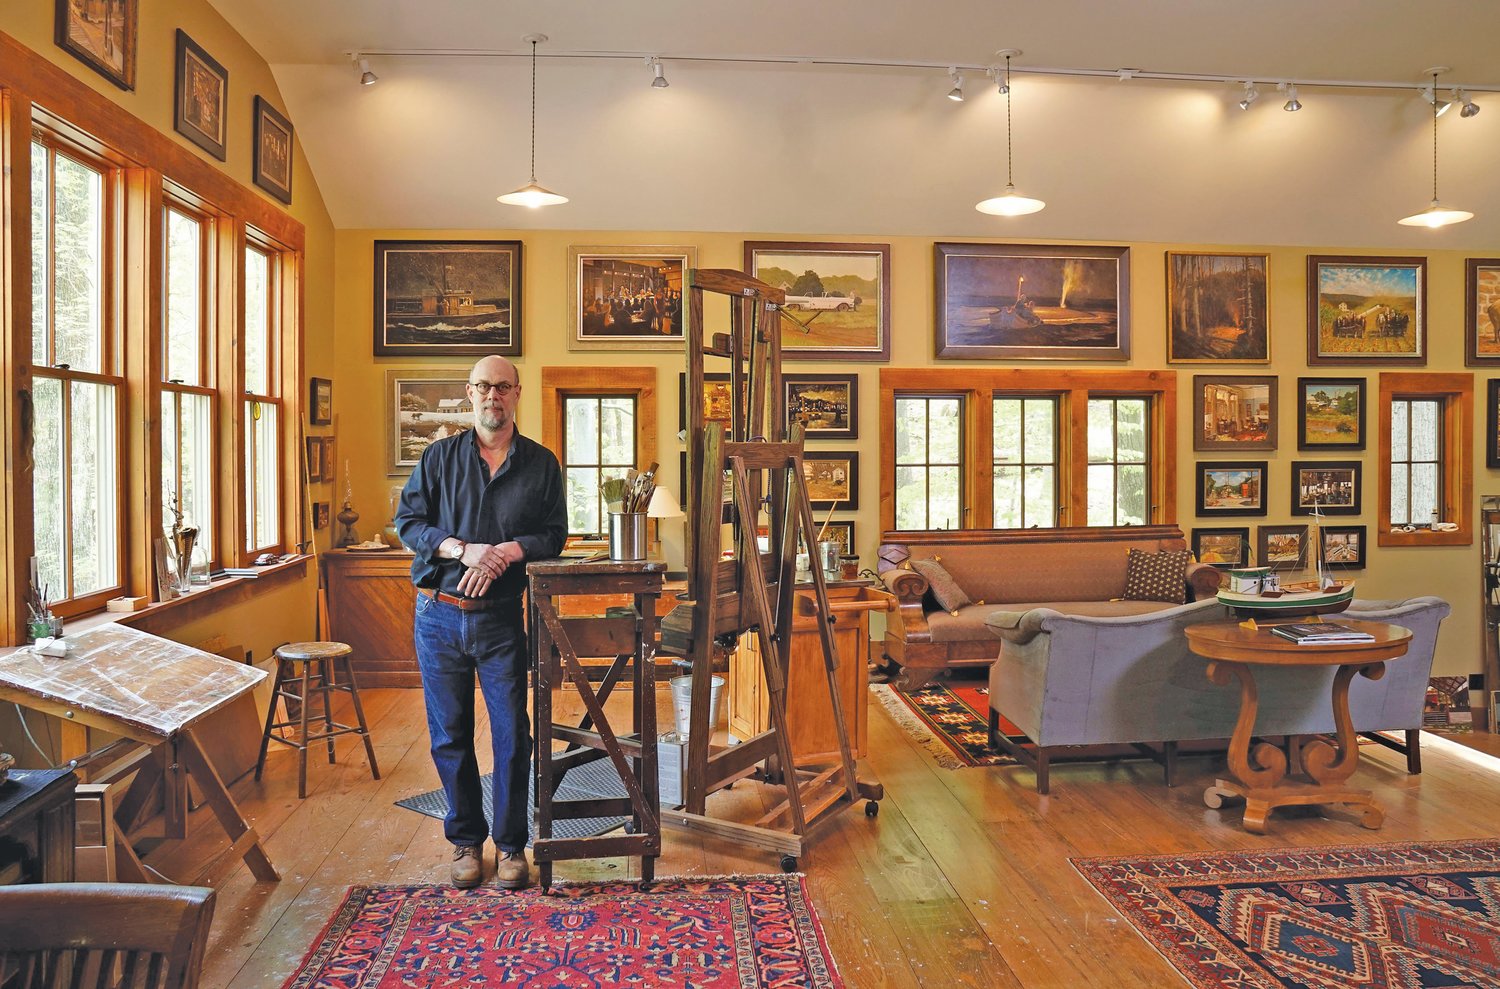 Robert Beck, with his paintbrushes and easel at the ready.